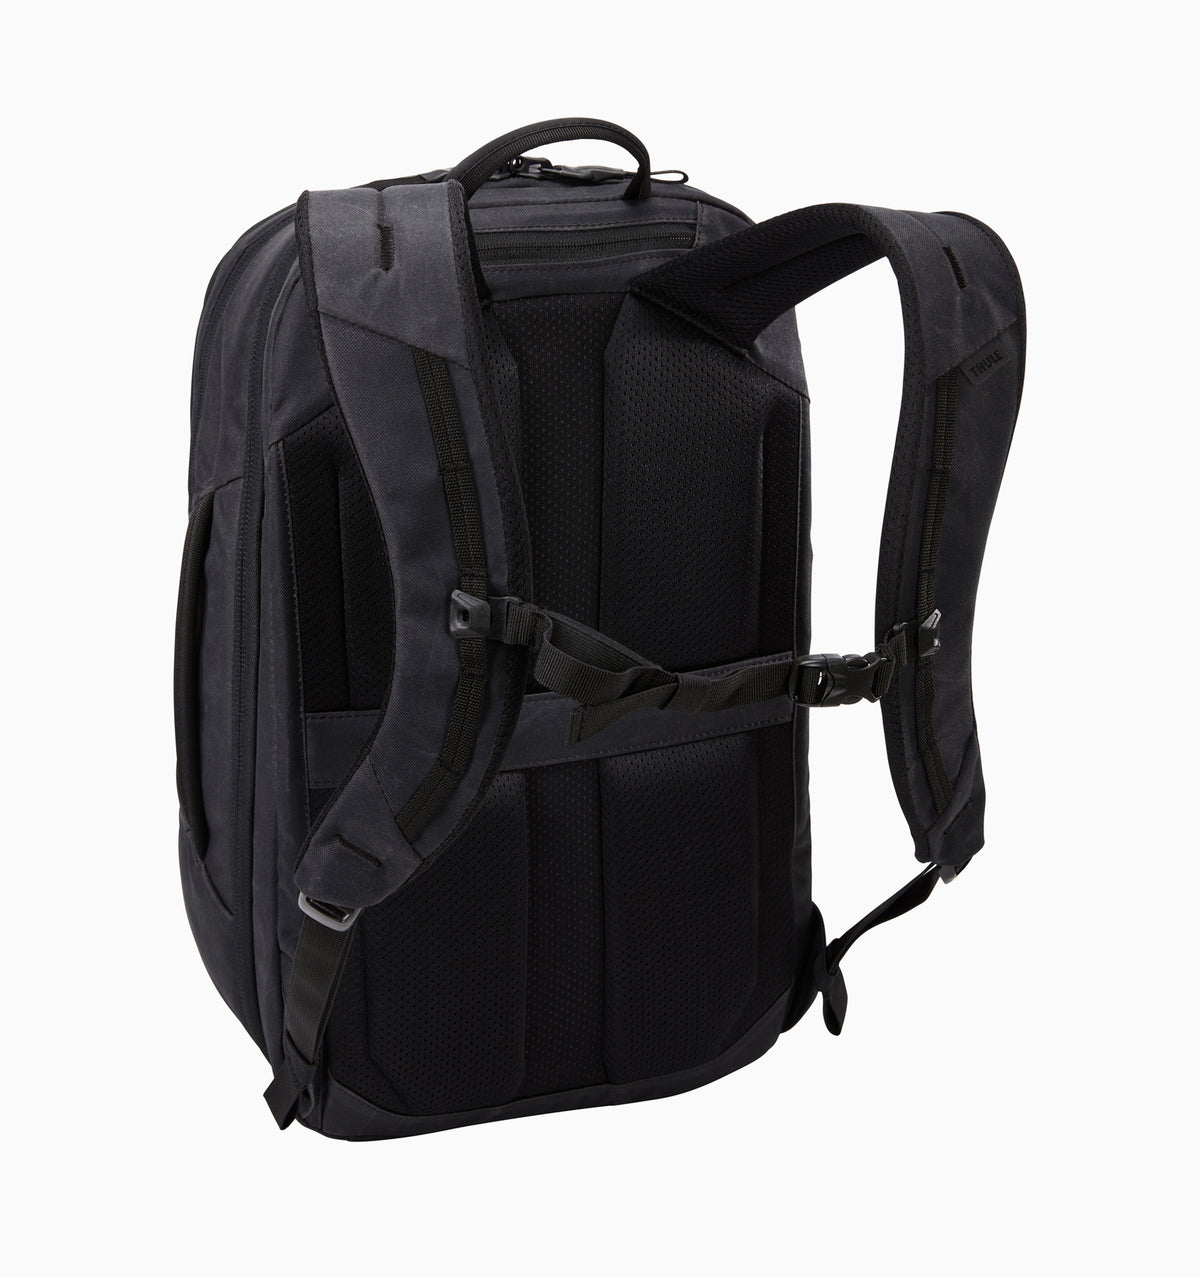 Thule - Aion - 16" Travel Backpack 28L - Black